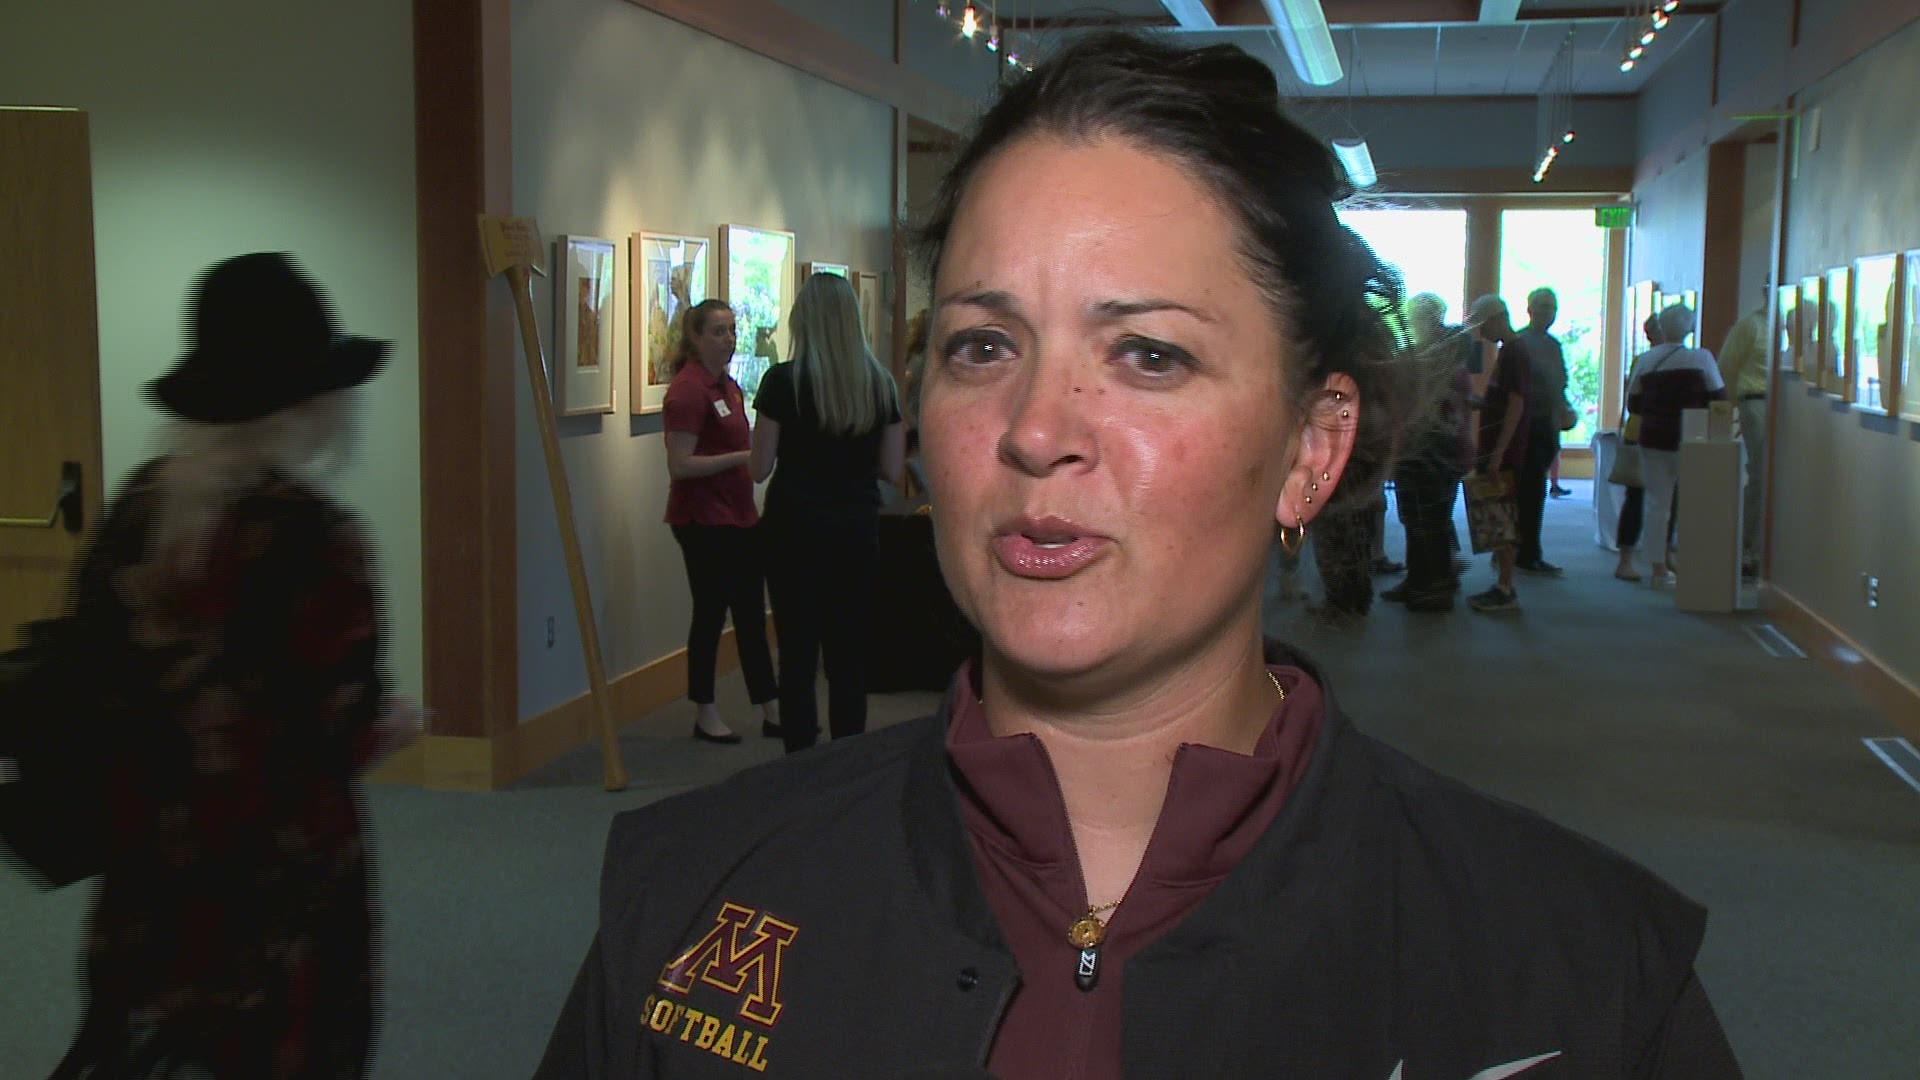 Gophers Head Coaches and staff joined Goldy in Chaska for the Coaches Caravan.